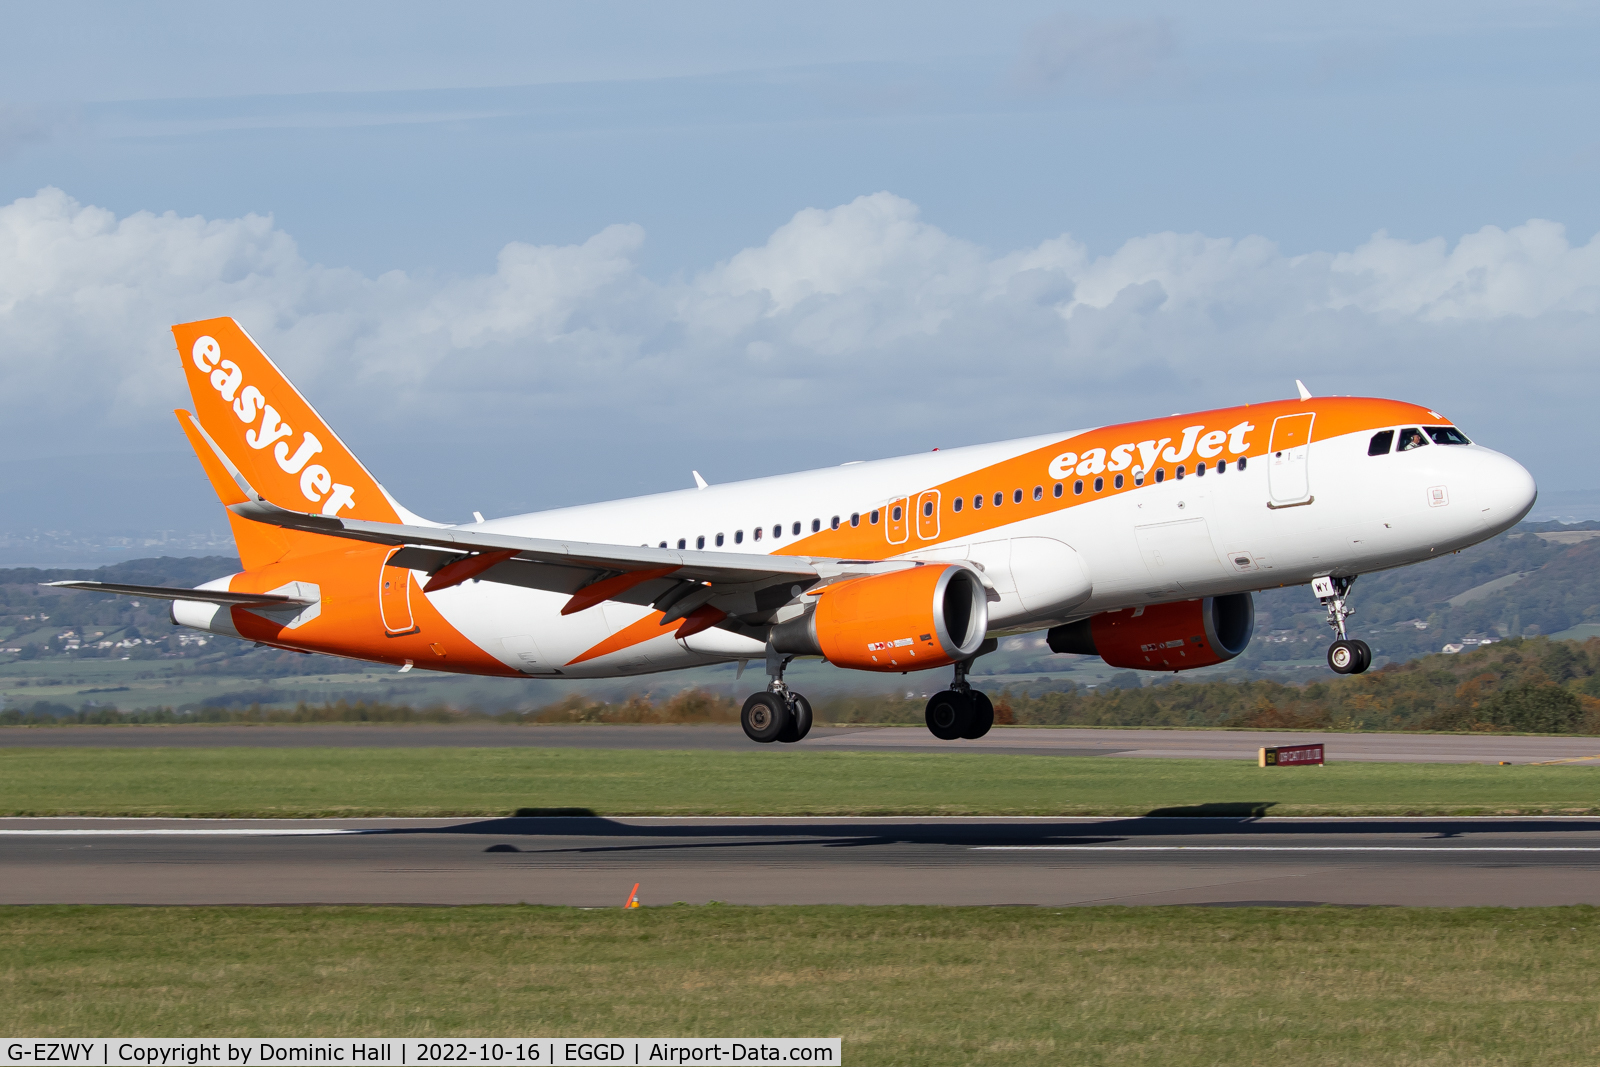 G-EZWY, 2014 Airbus A320-214 C/N 6267, BRS 17/10/22